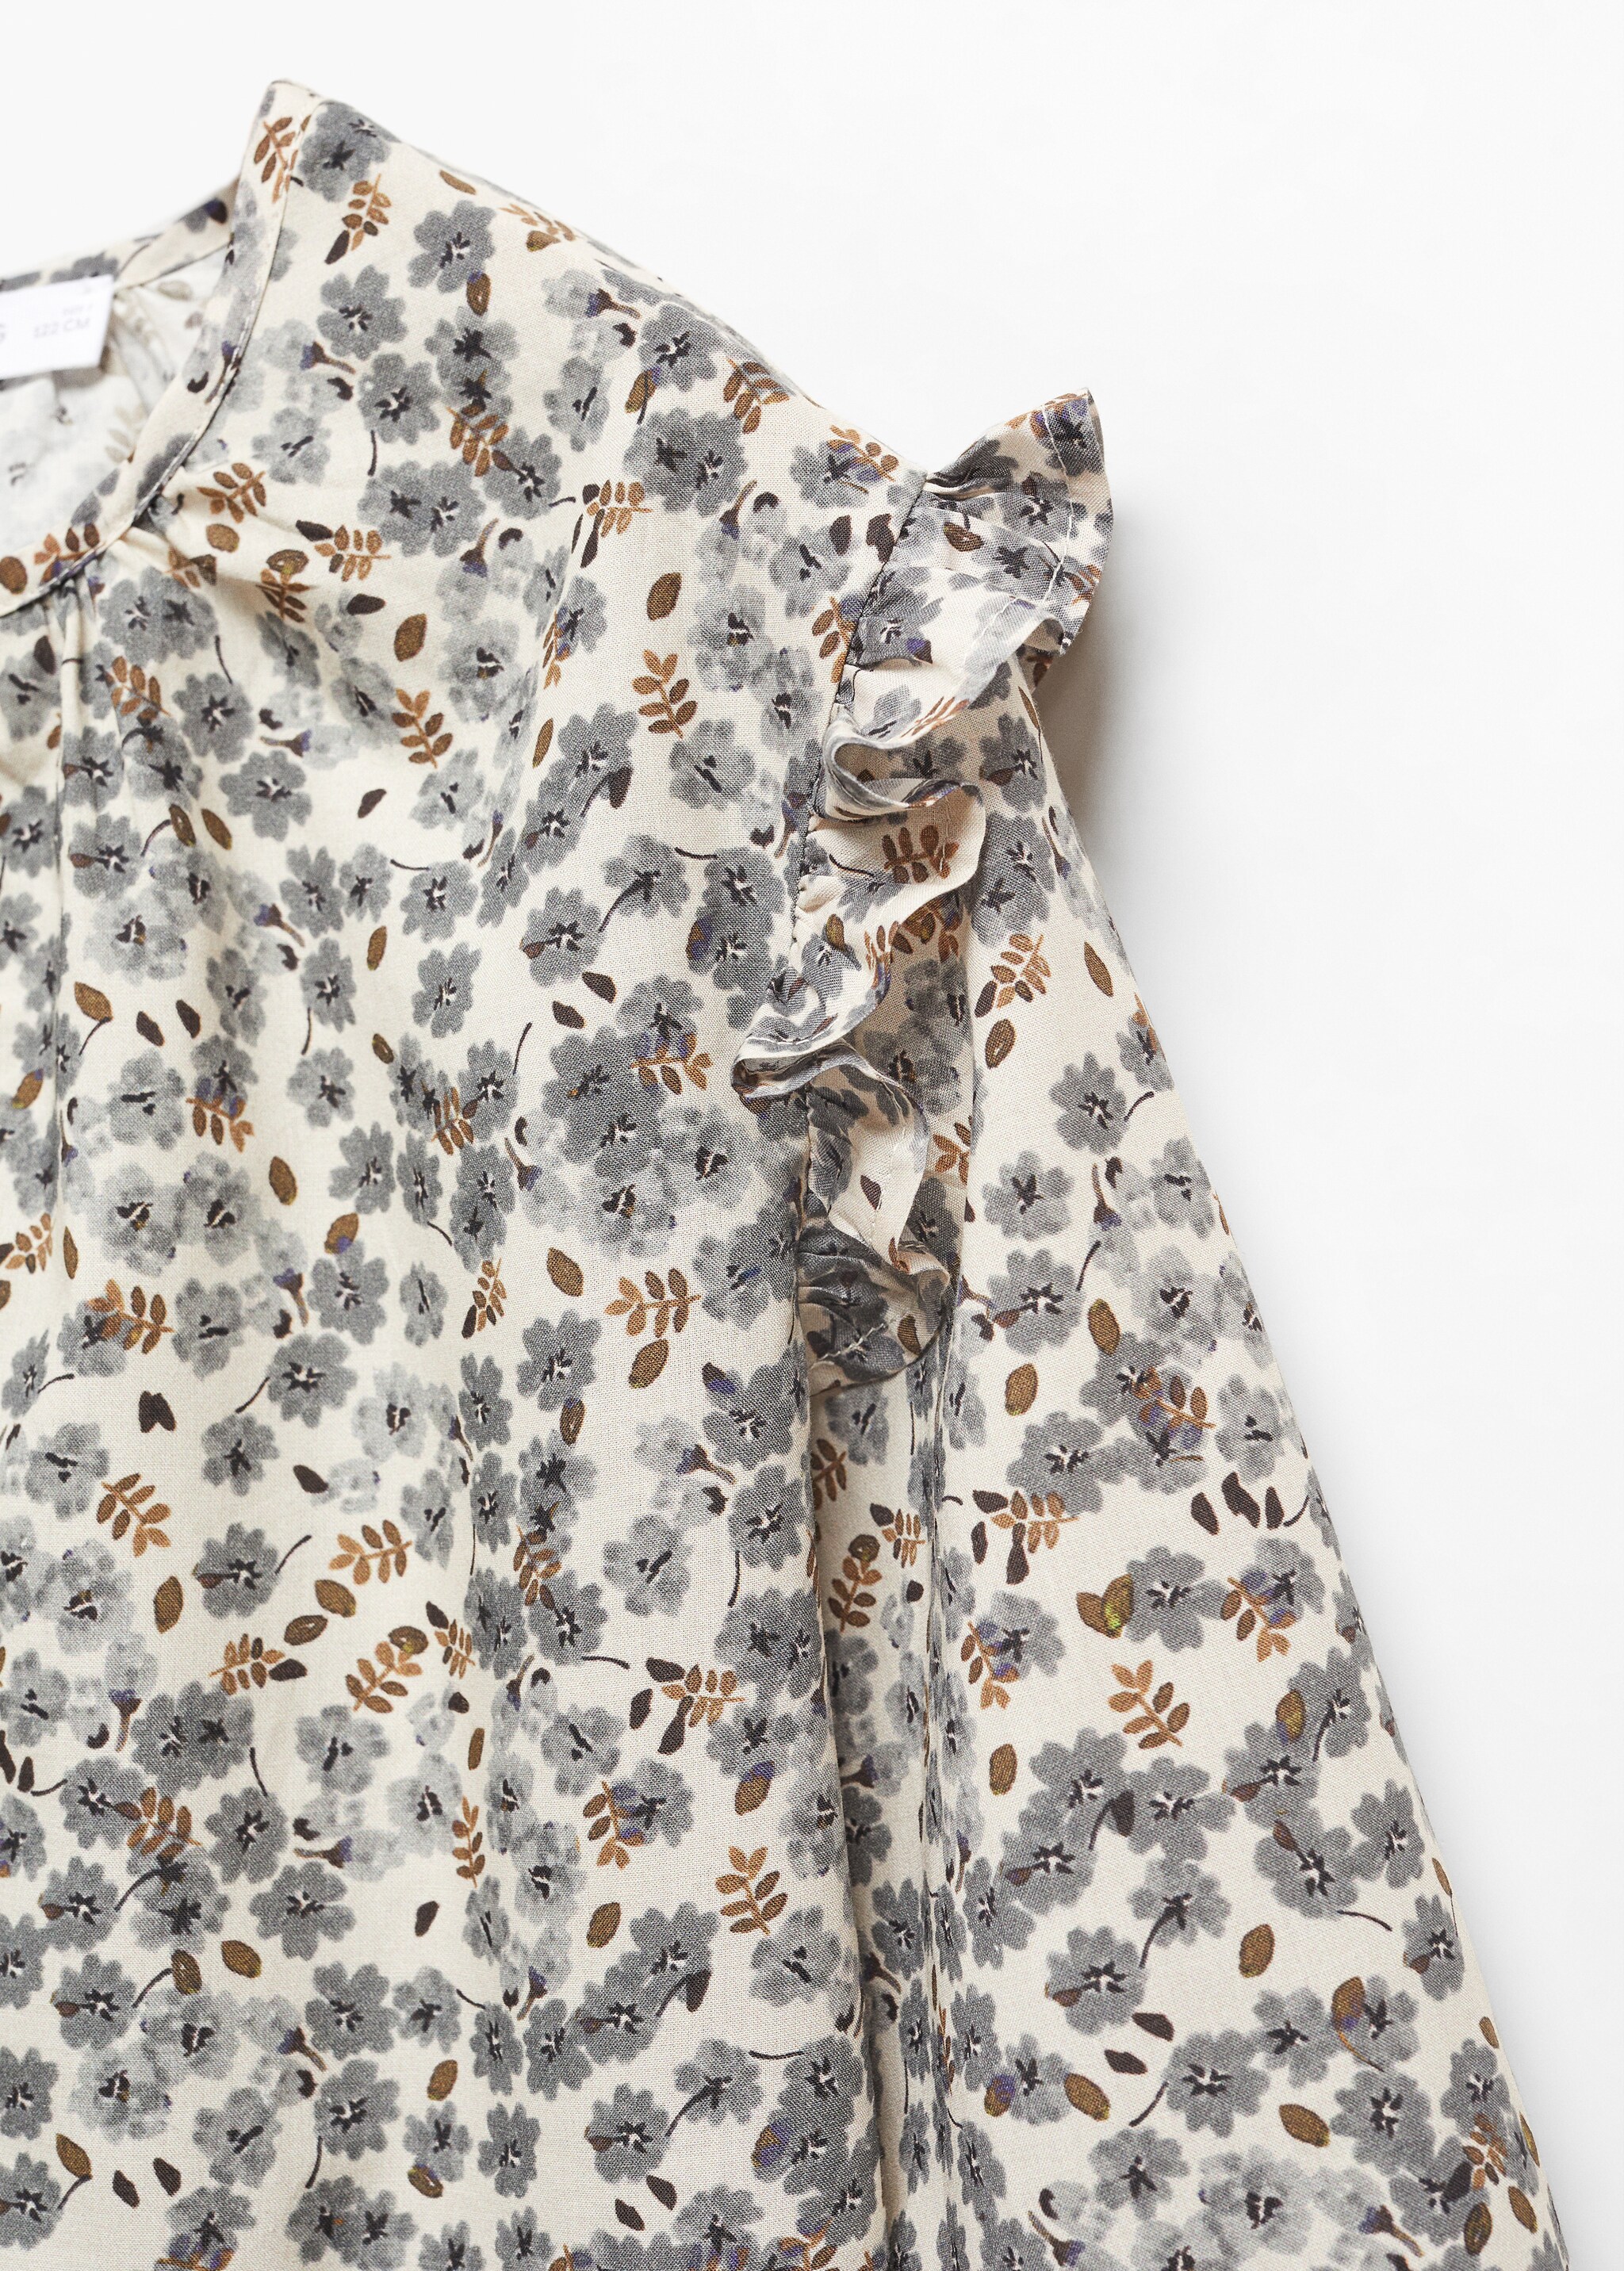 Printed cotton blouse - Details of the article 8